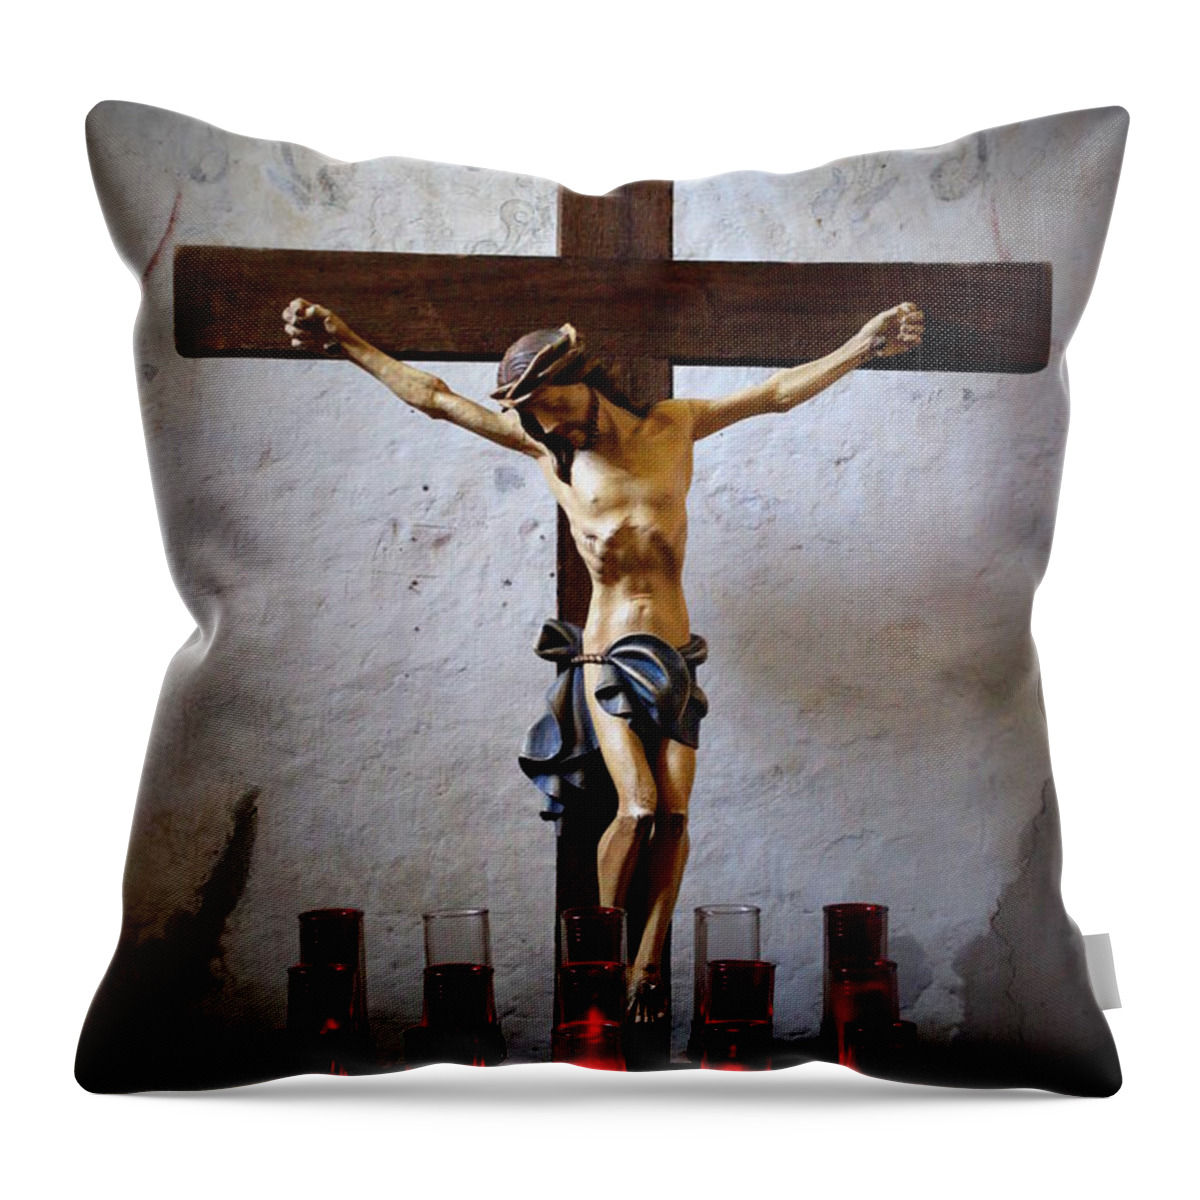 Mission Concepcion Throw Pillow featuring the photograph Mission Concepcion - Crucifixion by Beth Vincent